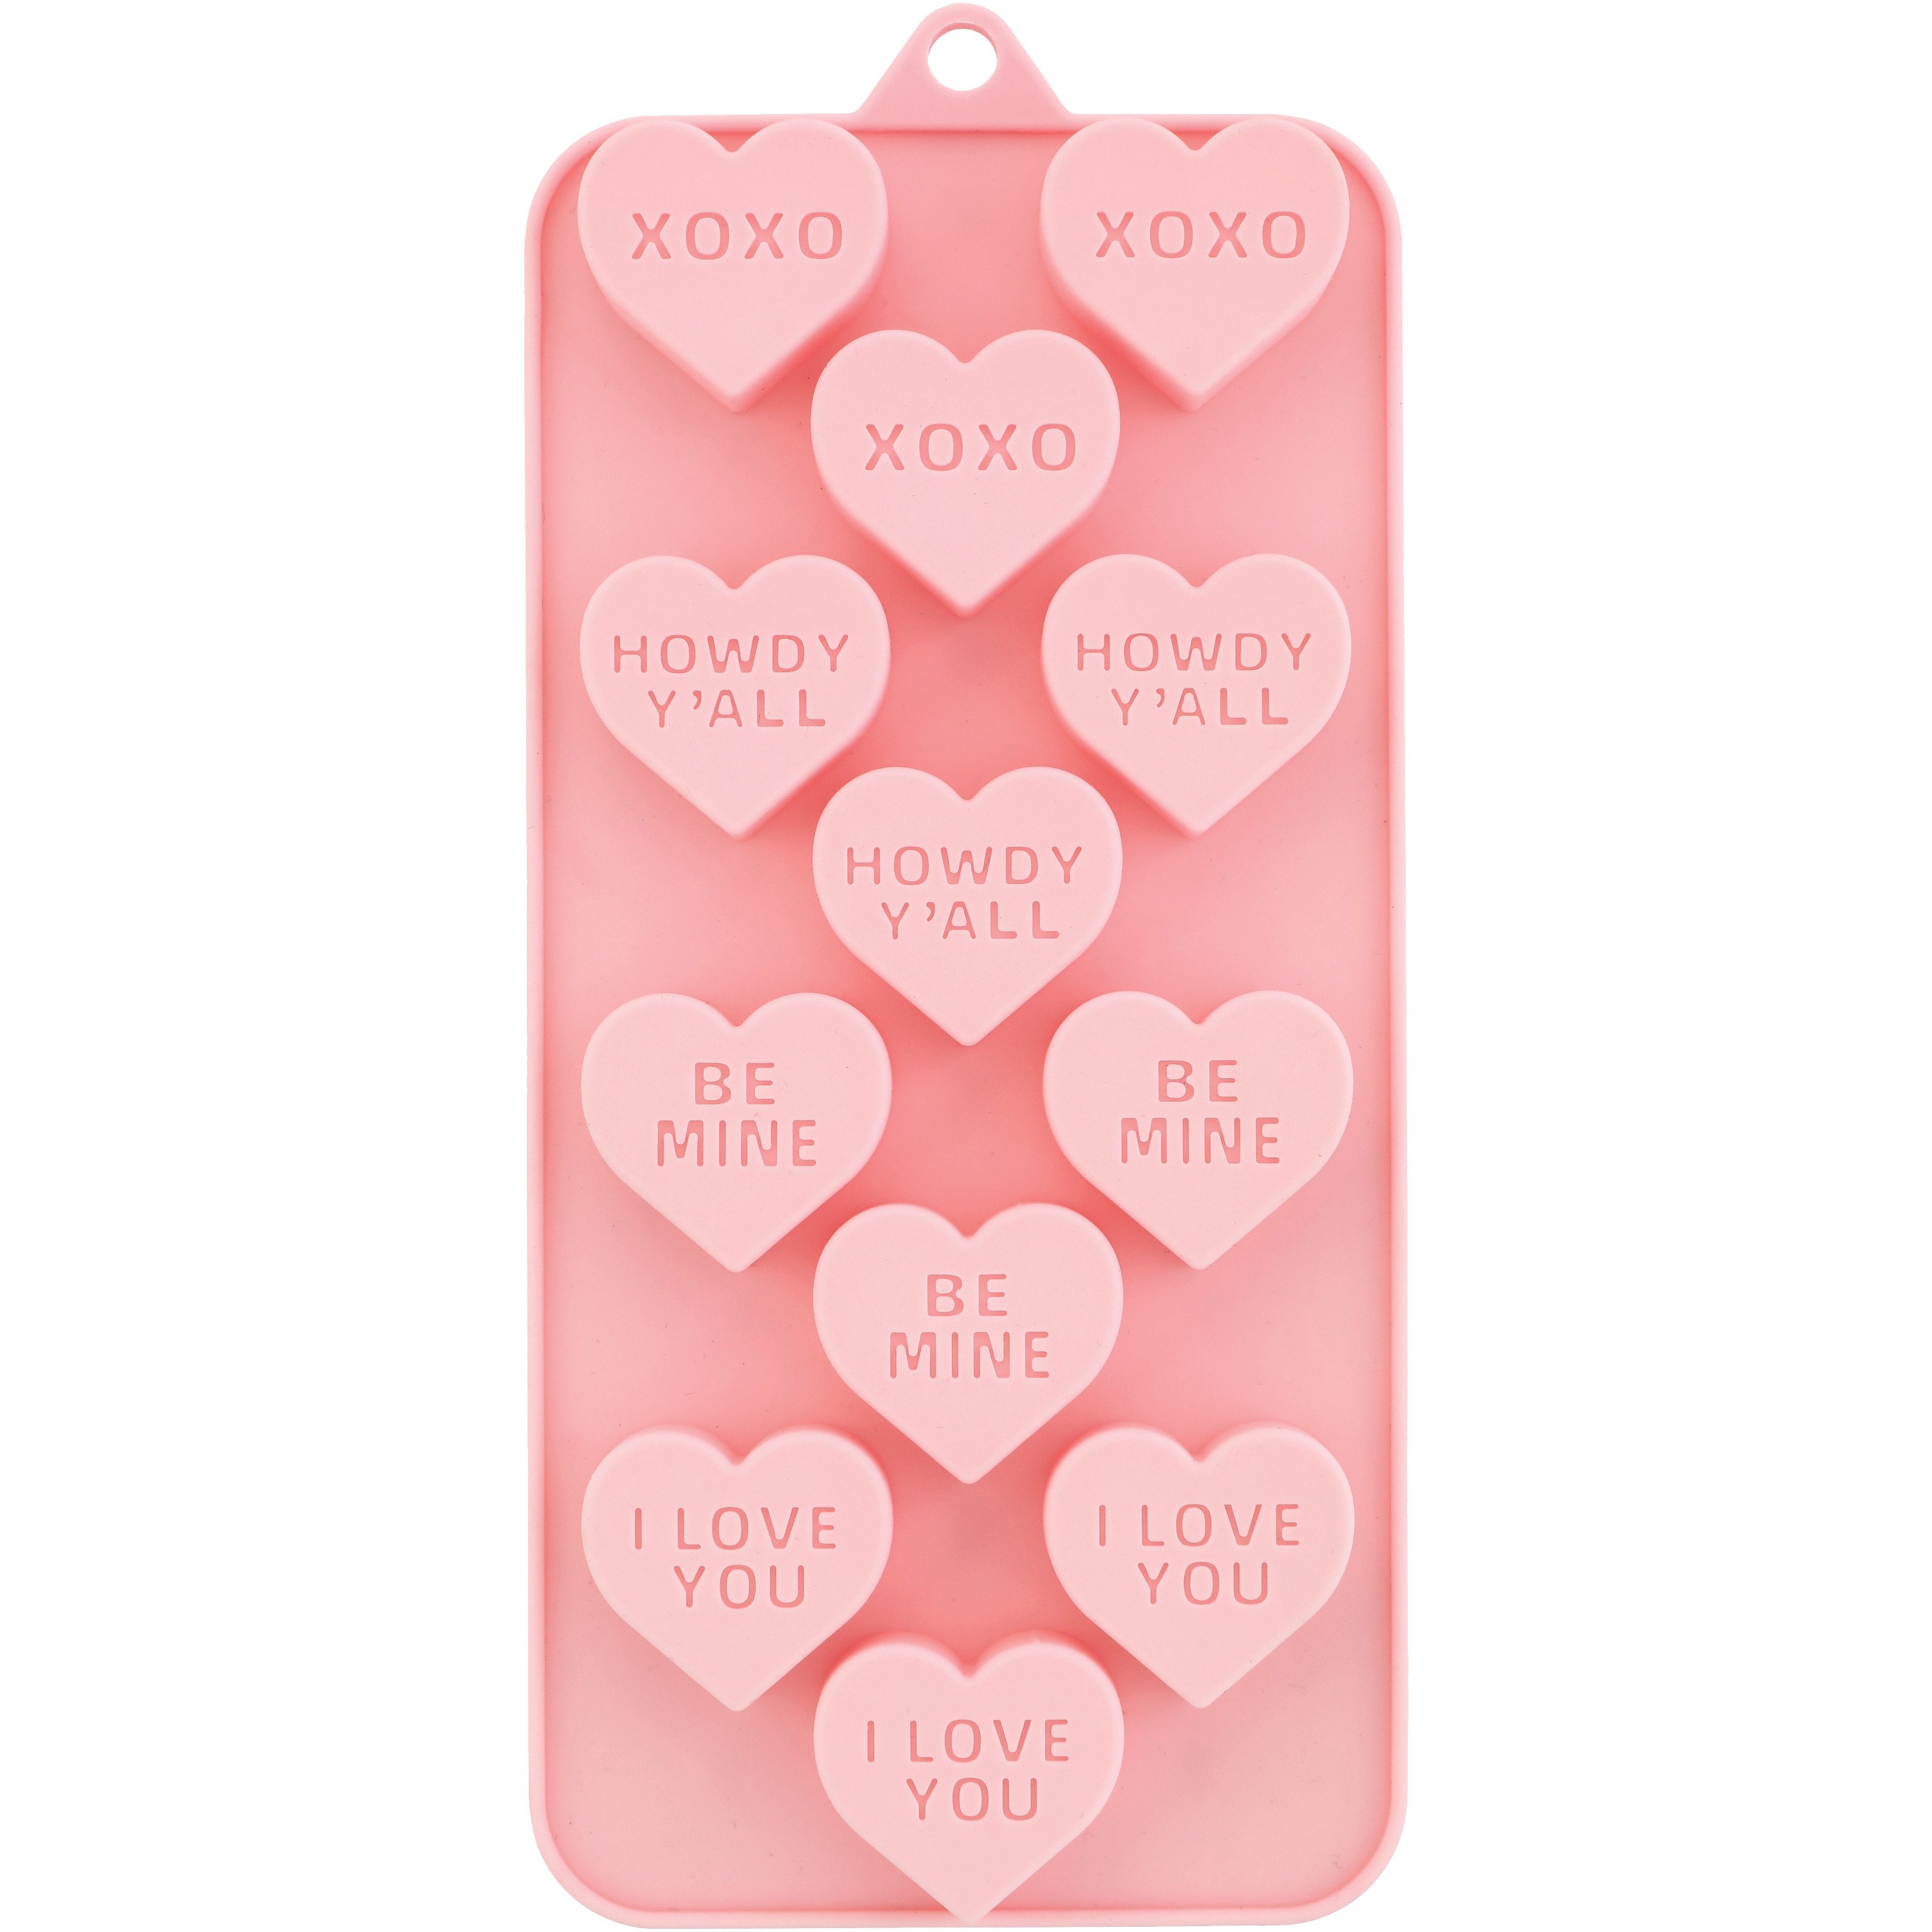 Candy Hearts Mold, Conversation Heart Candy Mold, Silicone Heart Mold